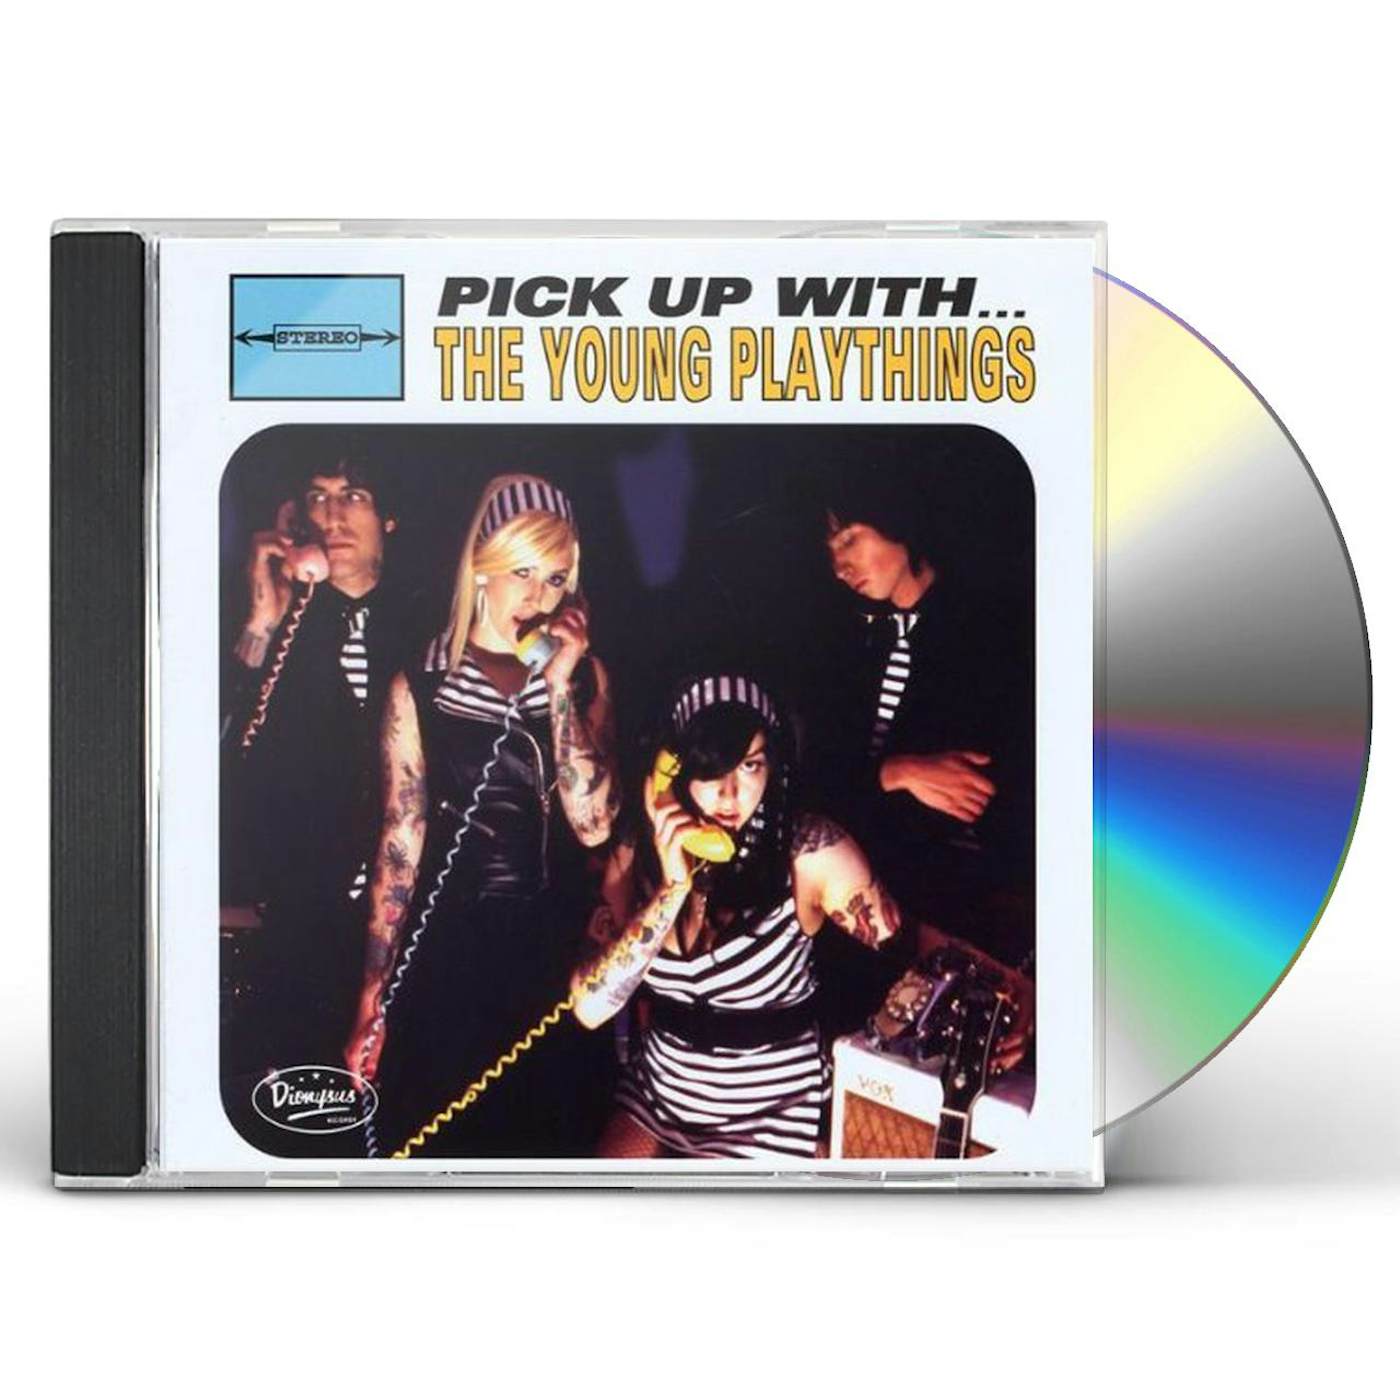 PICK UP WITH THE YOUNG PLAYTHINGS CD